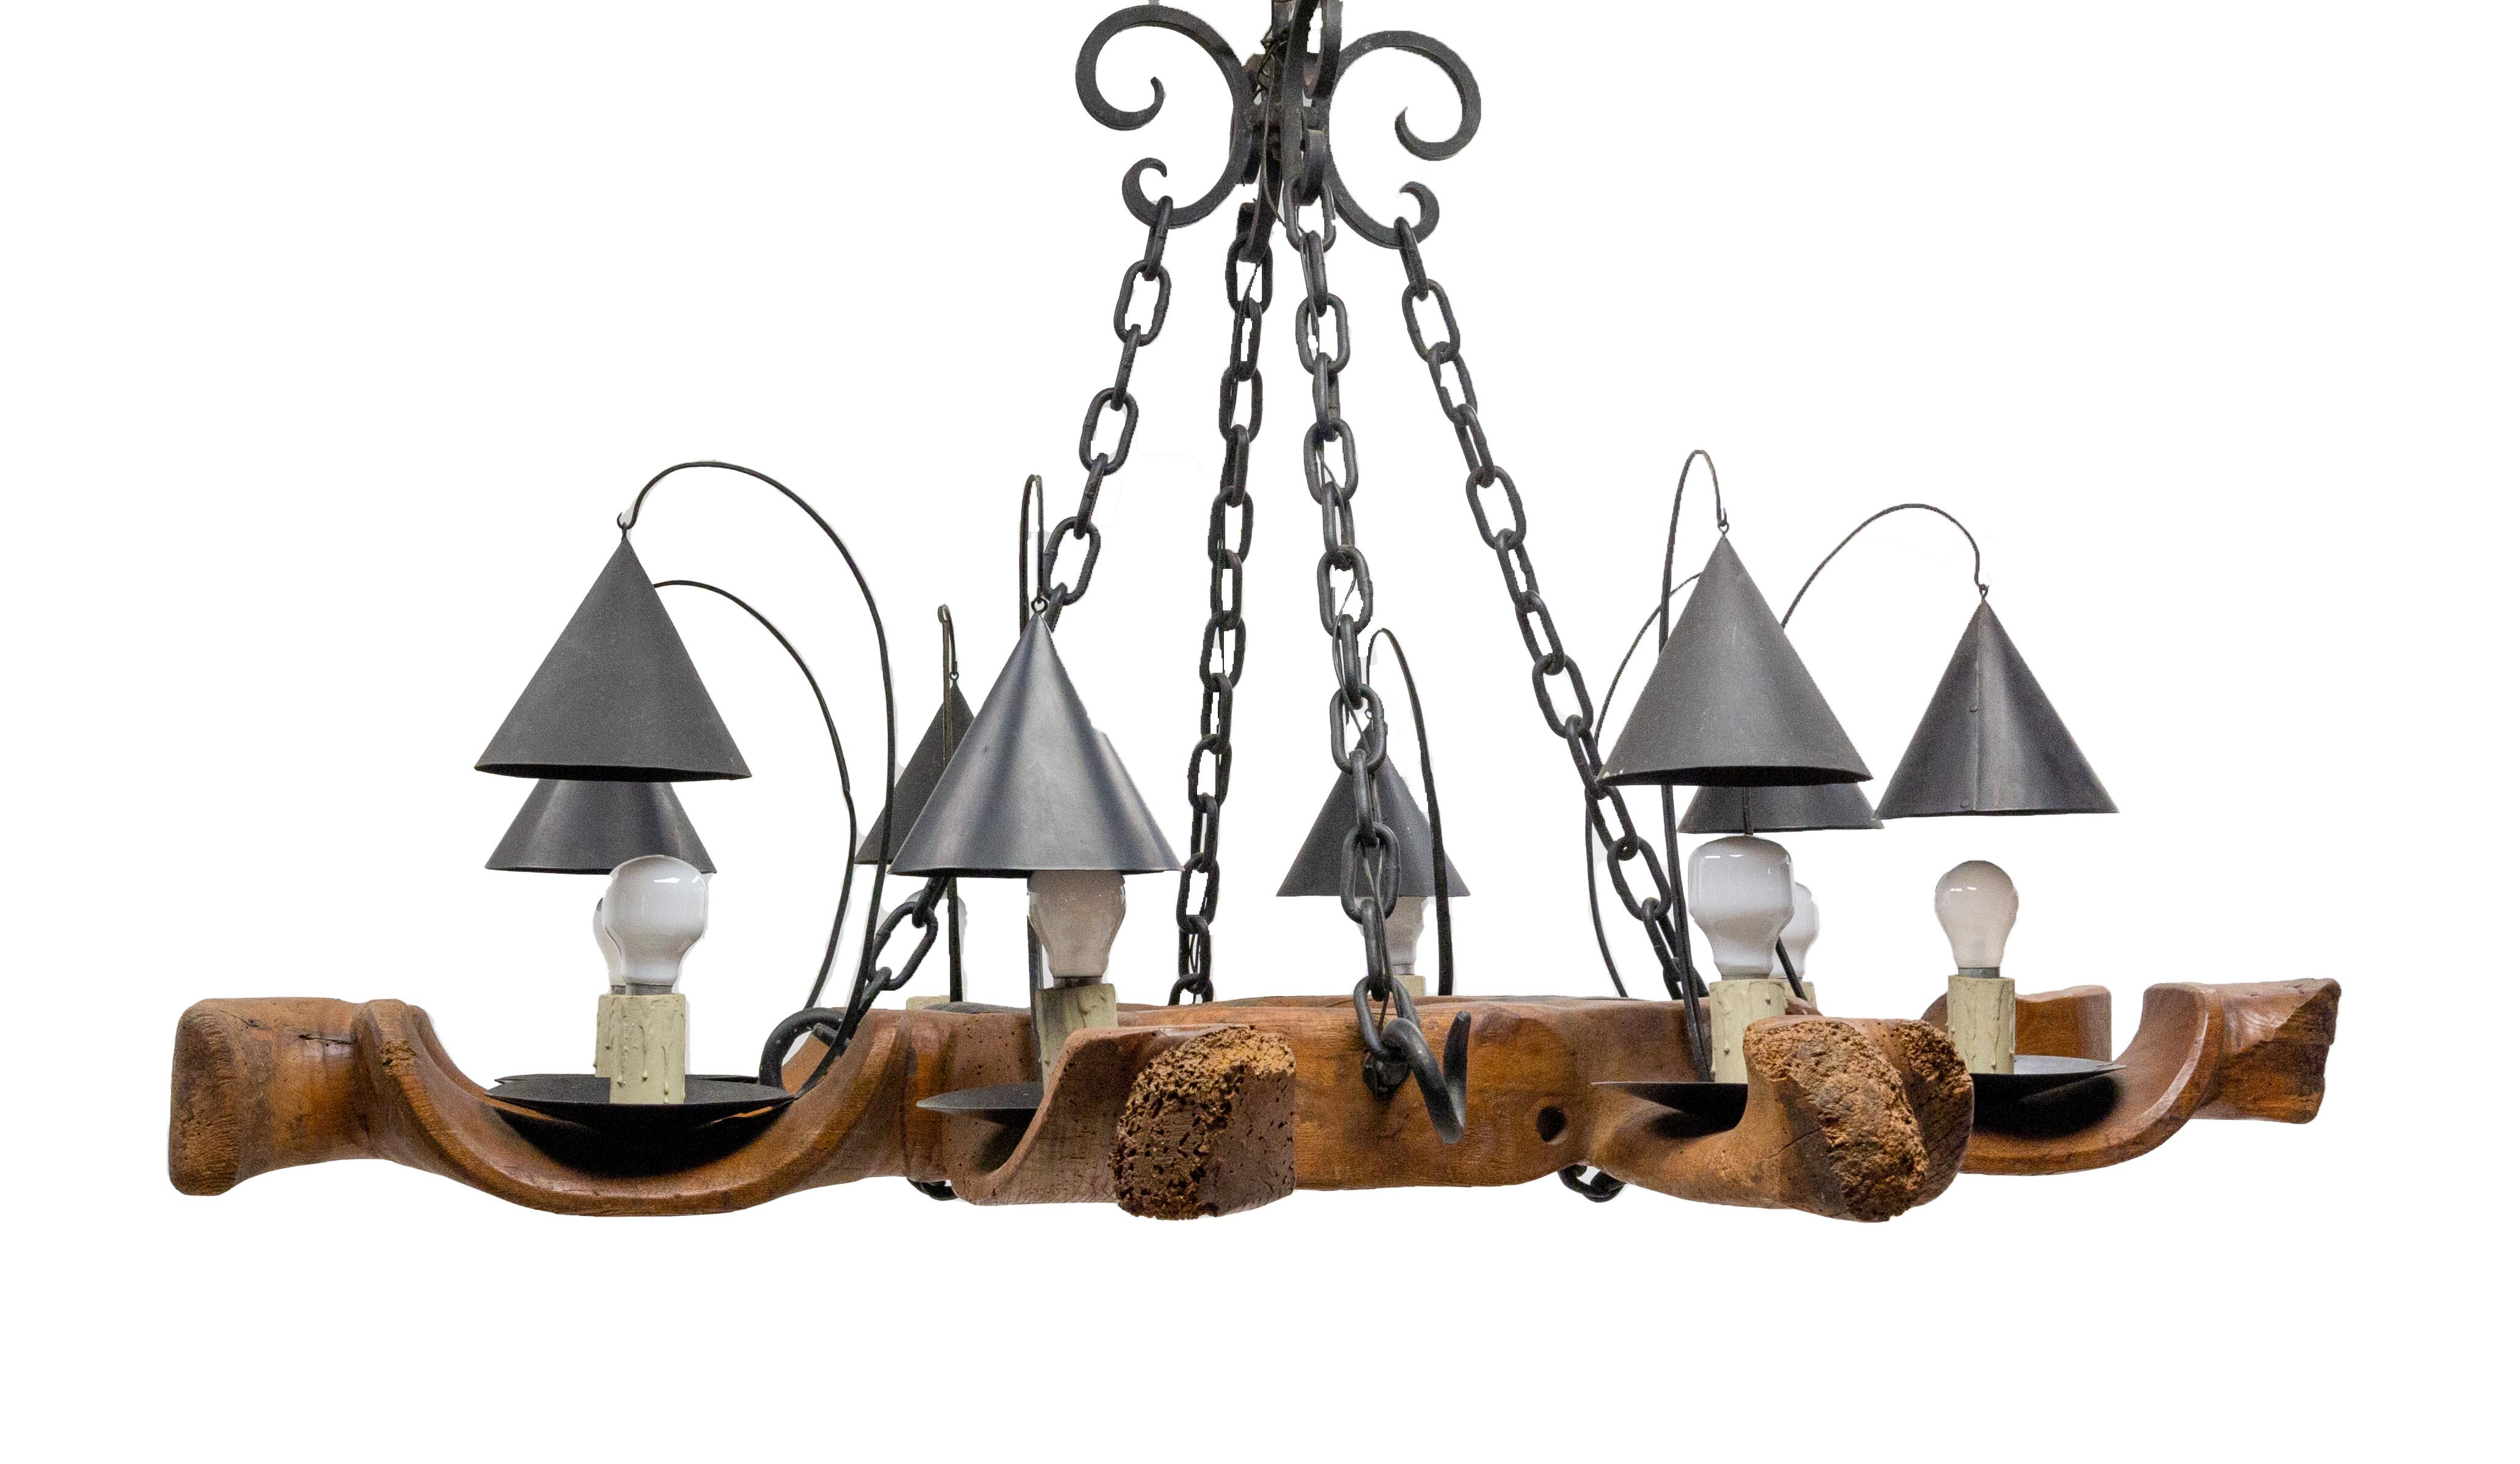 French chandelier composed with four ox yokes
Rare pendant light with eight lamps.
Each light is covered by a lampshade.
Wear consistent with age and use.
This can be rewired to USA or EU and UK standards please ask.
An additional matching chain